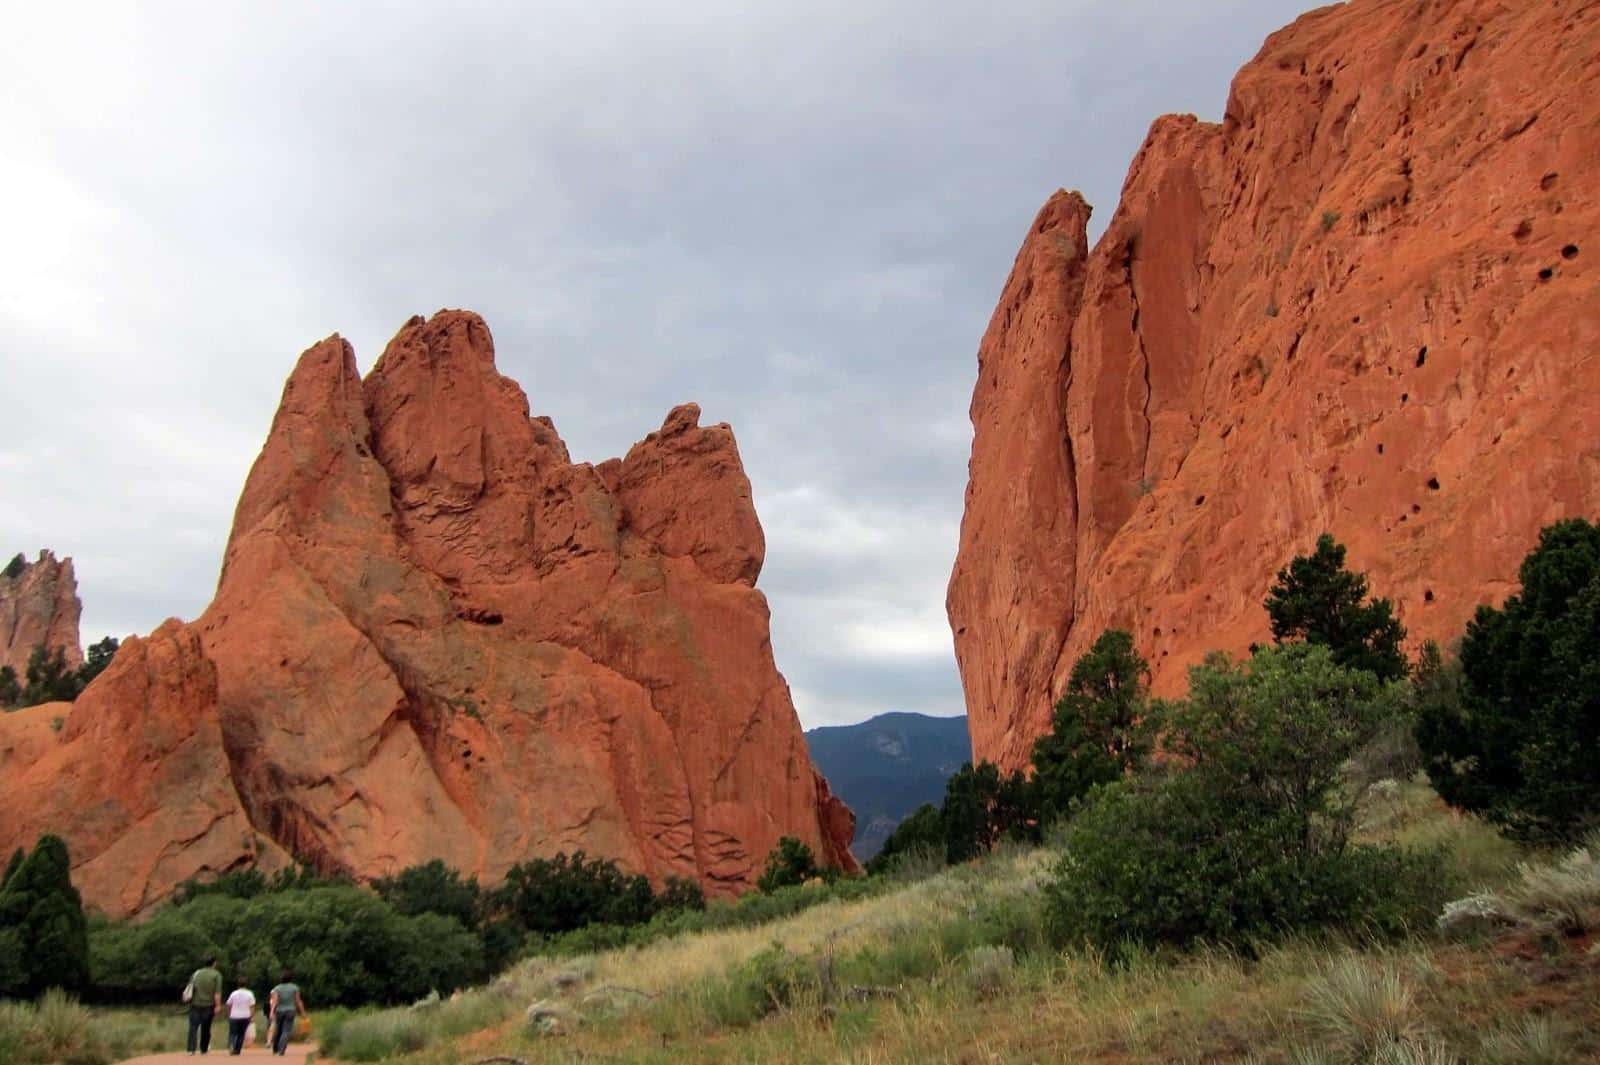 rocks at Garden of the Gods and people walking on path